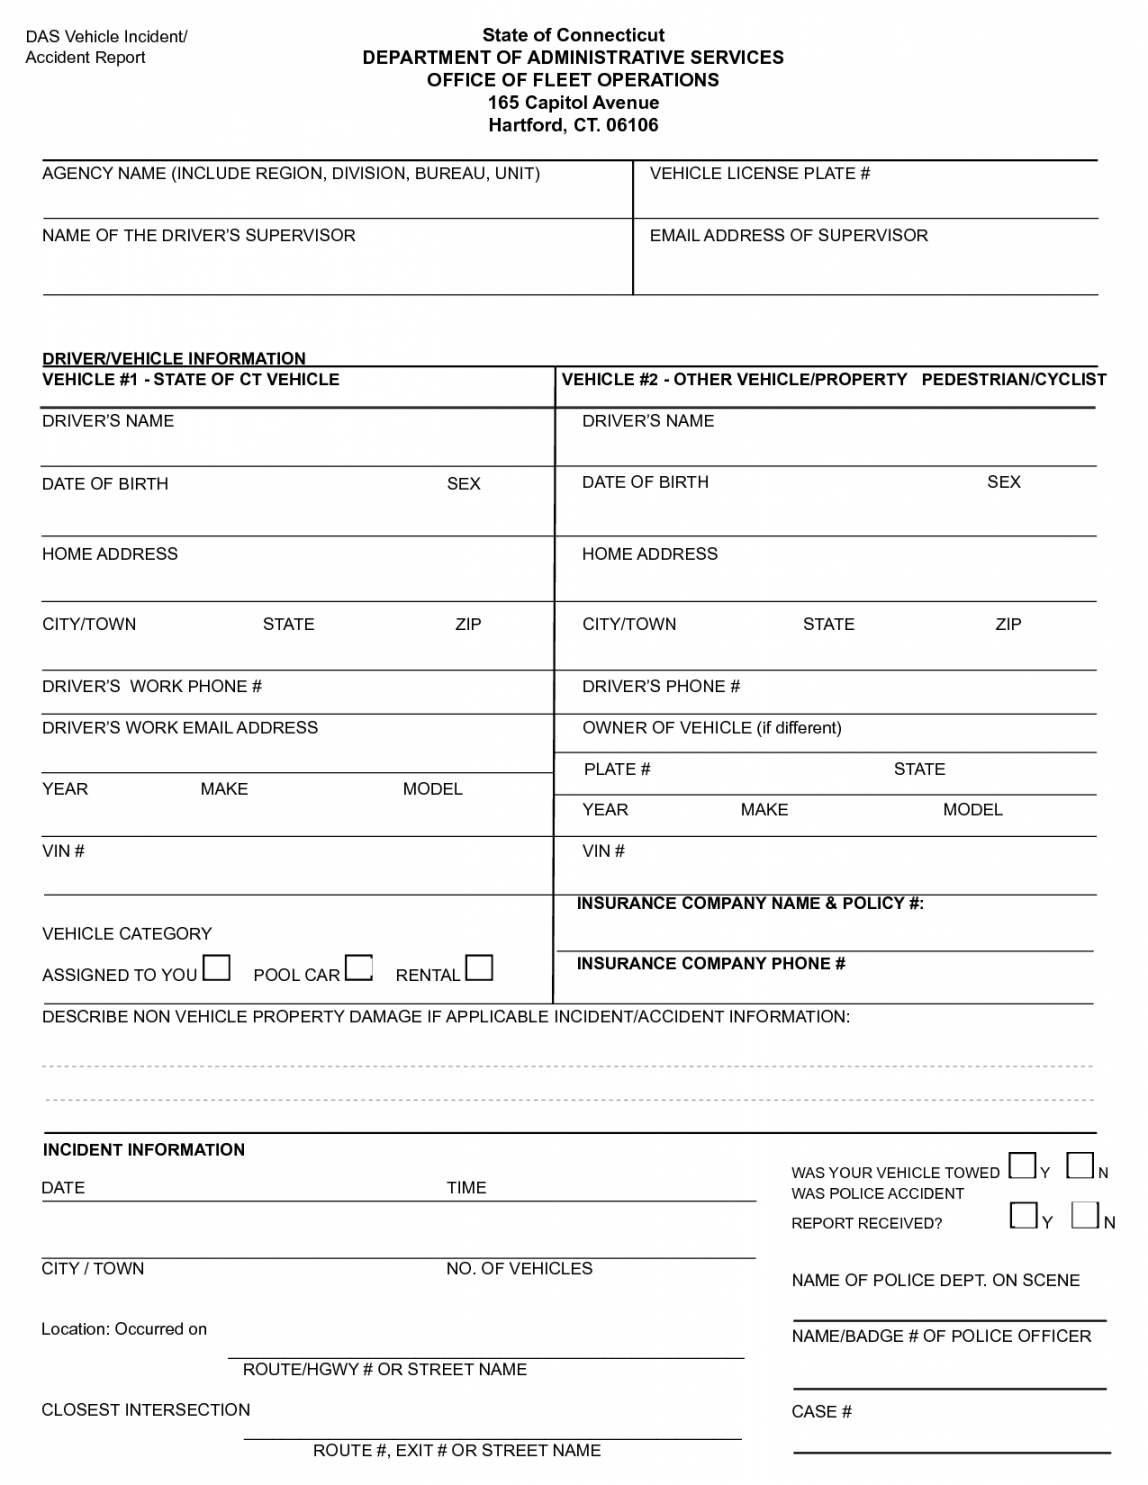 Vehicle Incident Report Template Within Vehicle Accident Report Template